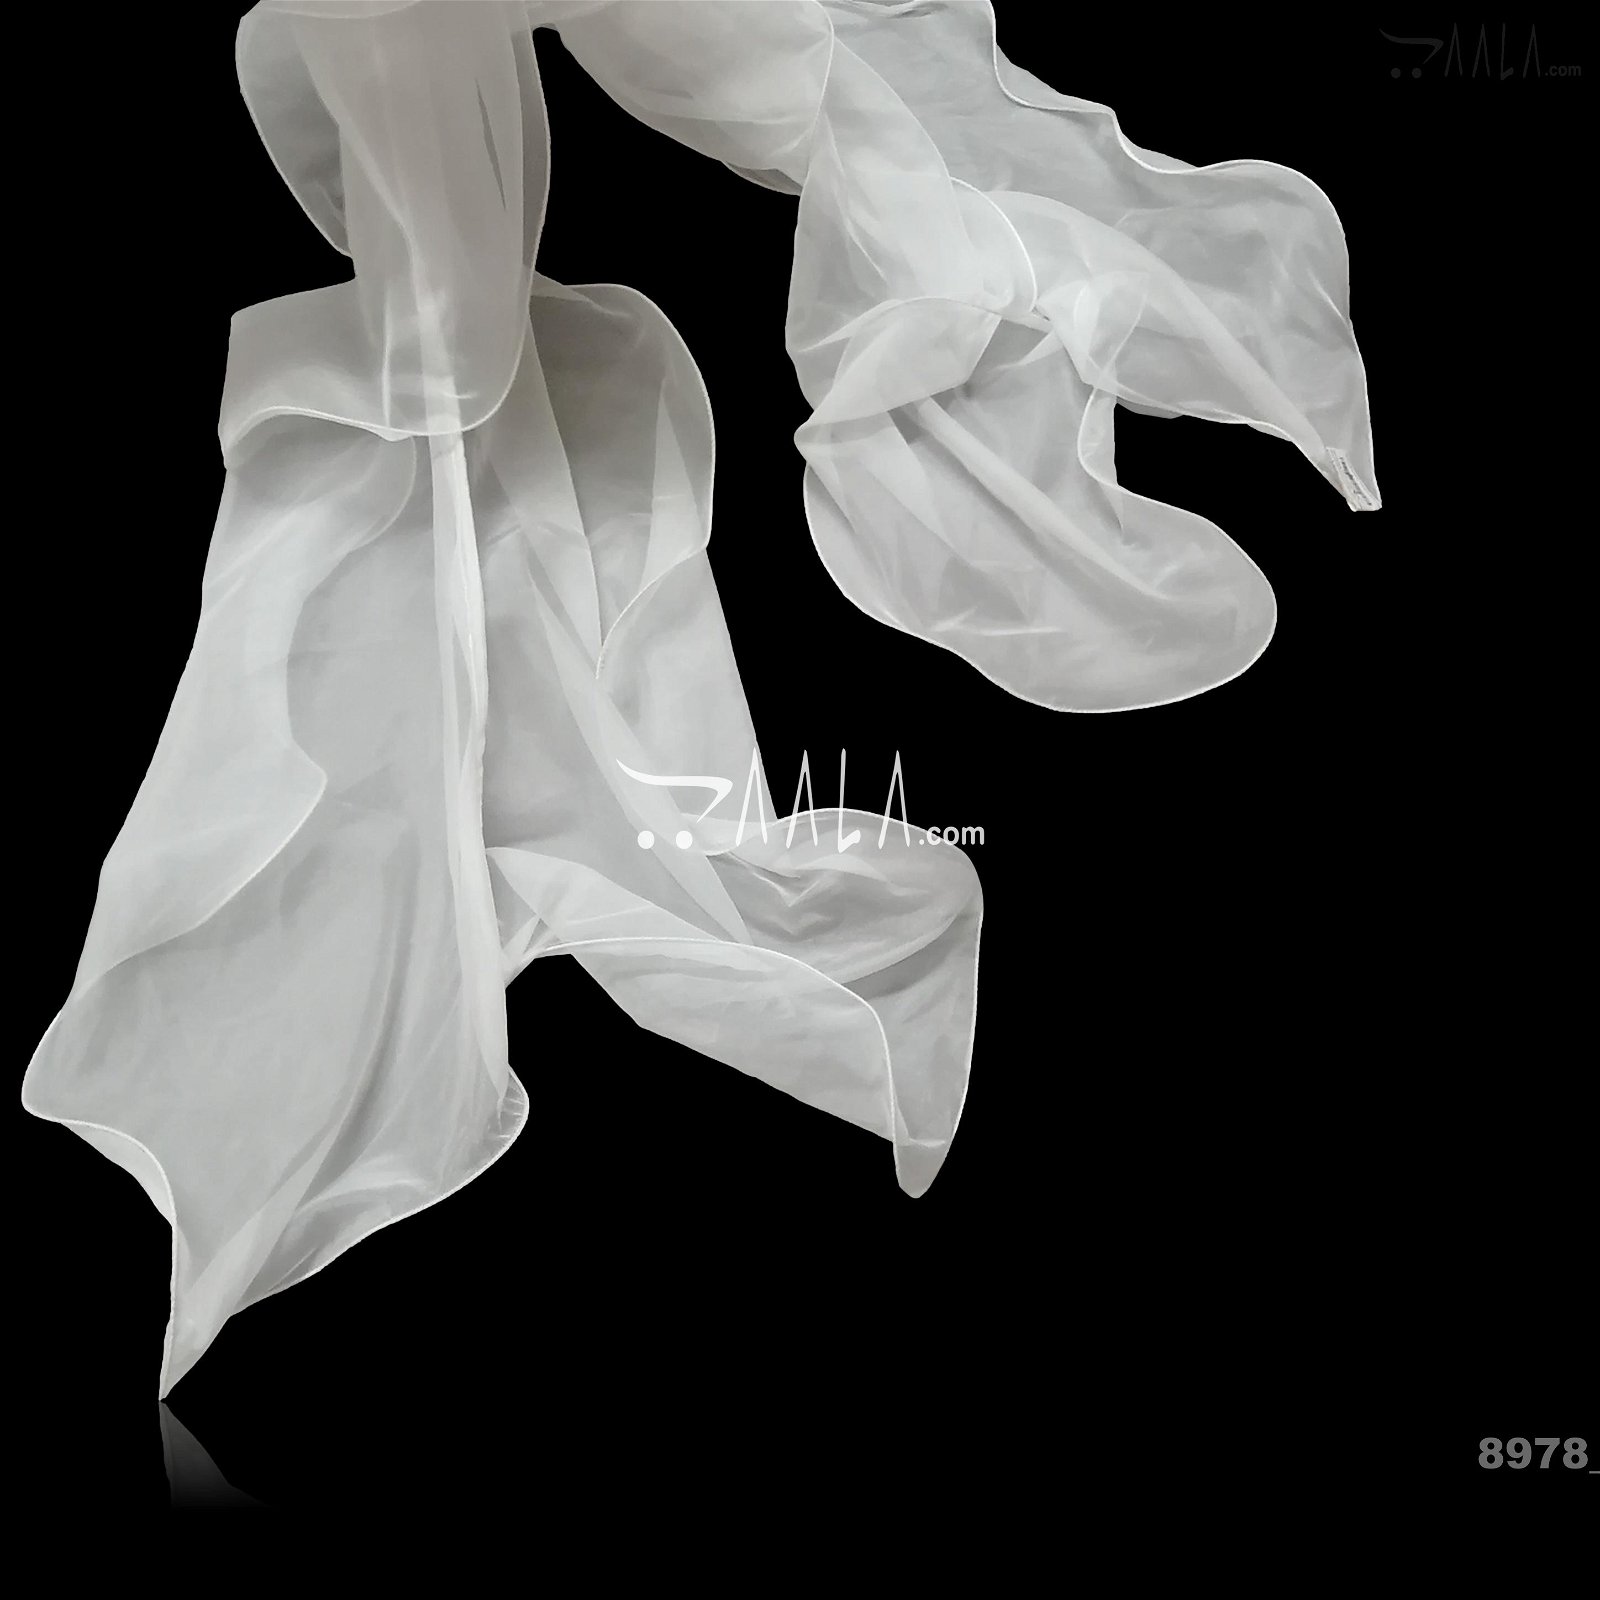 Ruffle-Two-Layers Organza Nylon Dupatta-20-Inches DYEABLE 2.25-Metres #8978